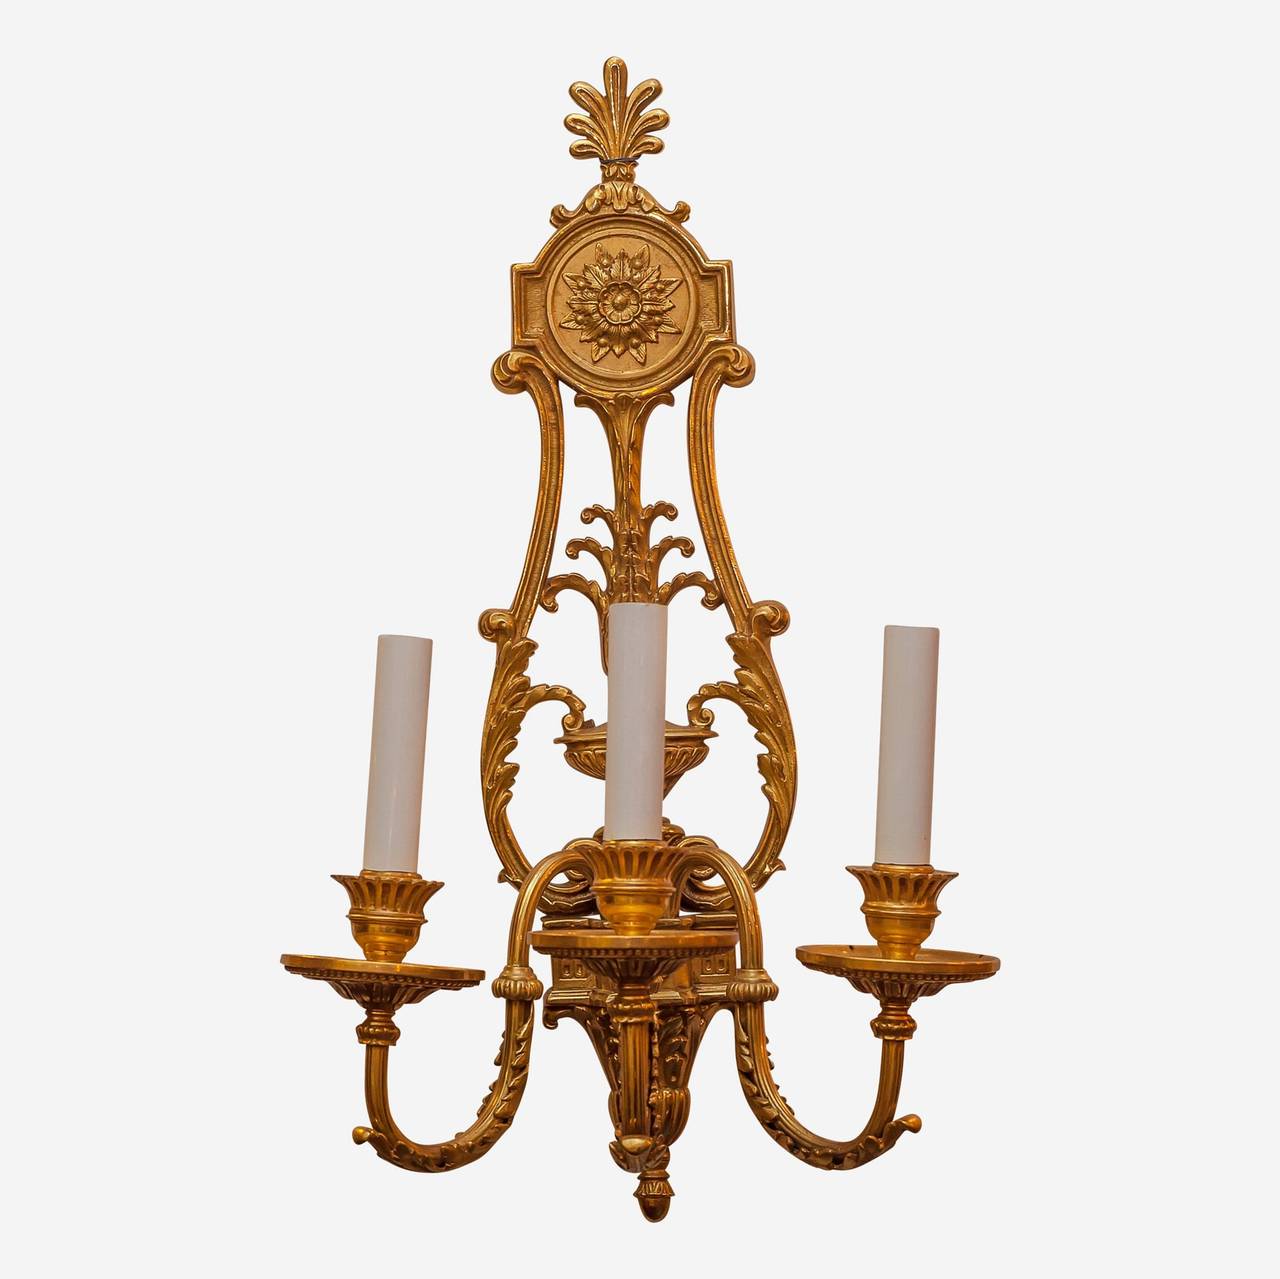 Exquisite Pair of Gilt Bronze Louis XVI Style three-Arm Wall Light sconces
Stock Number: L222